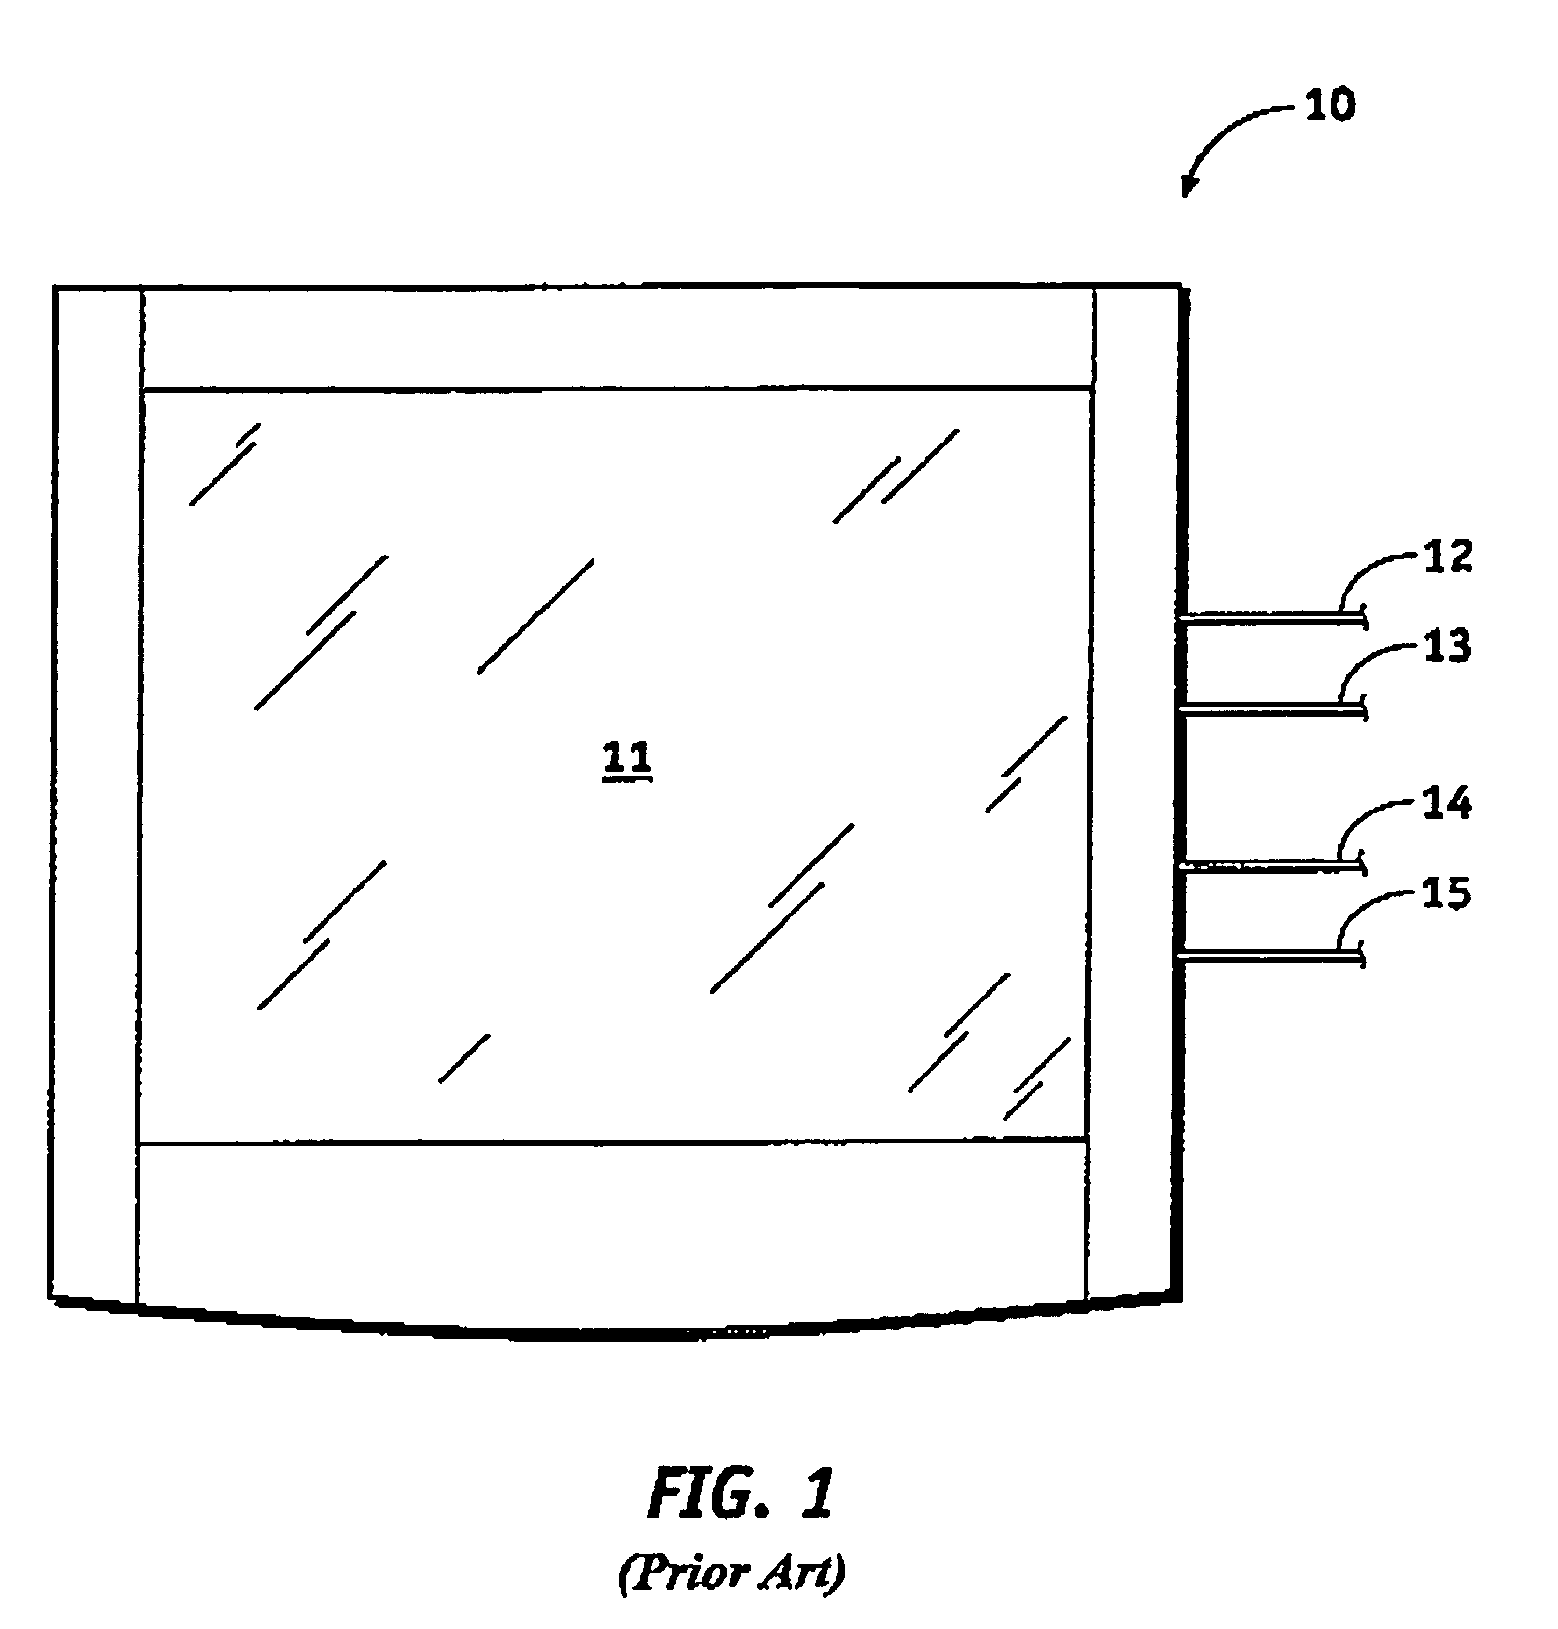 Touch screen apparatus and method therefore